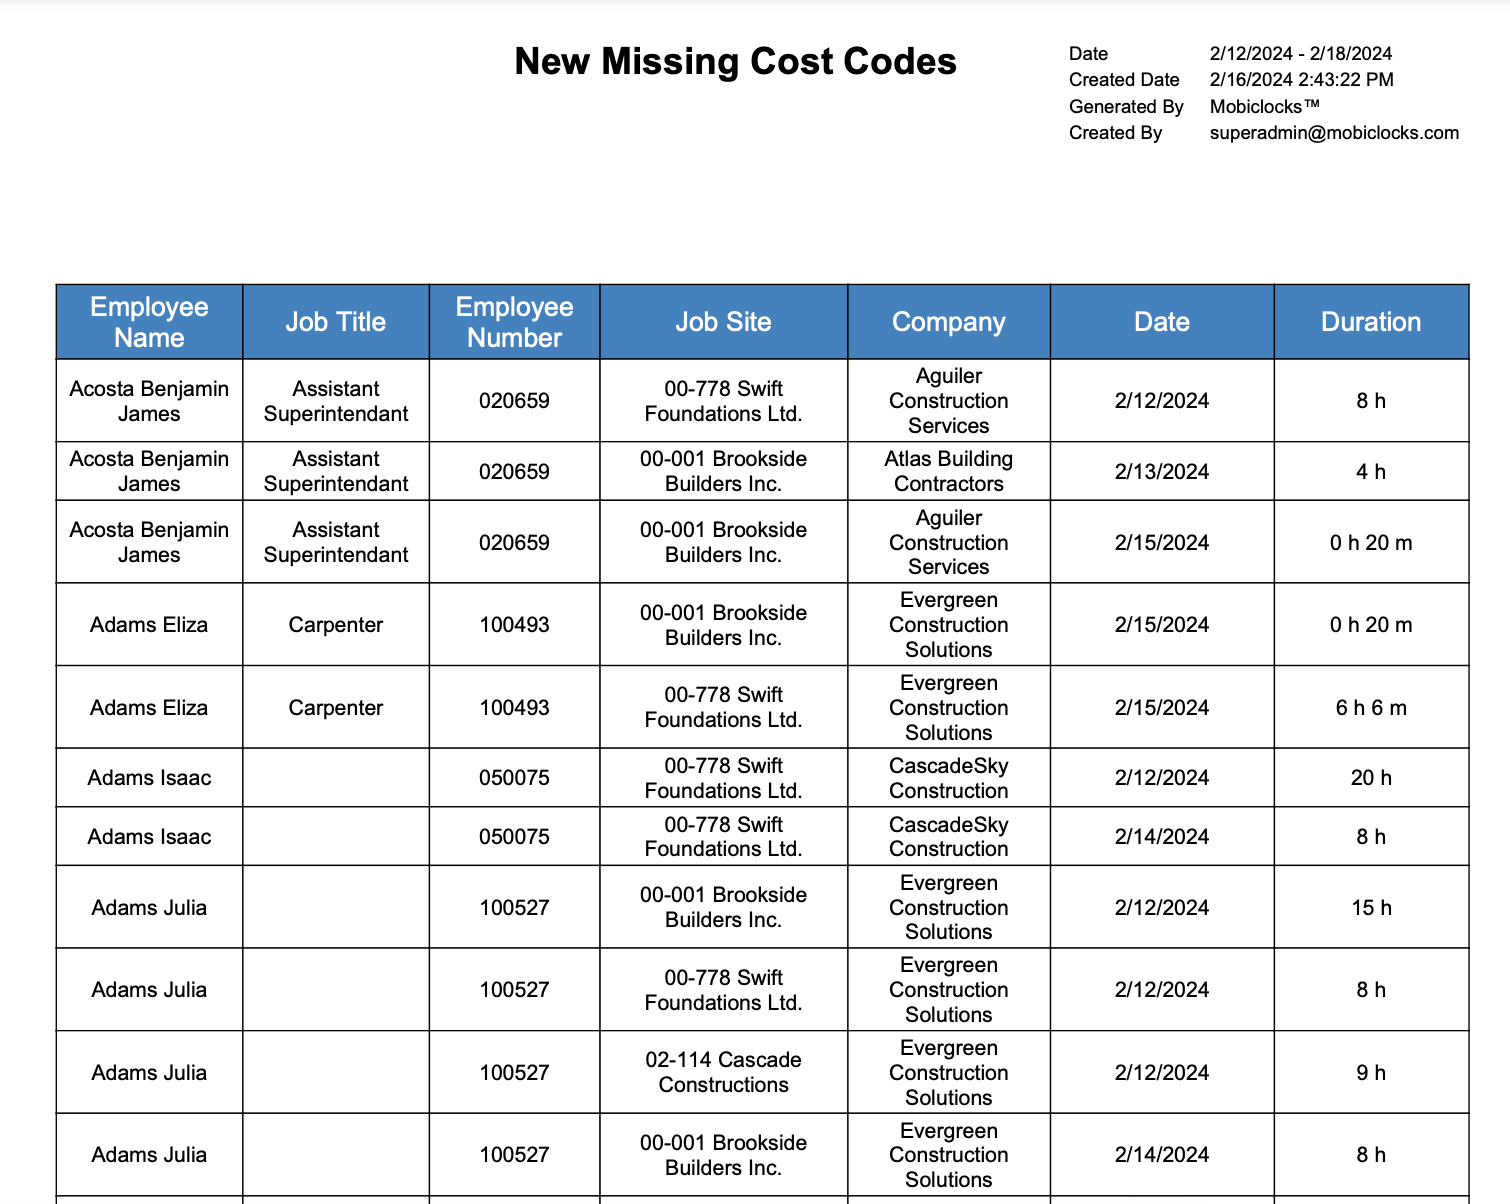 **New MIssing Cost Codes** report example